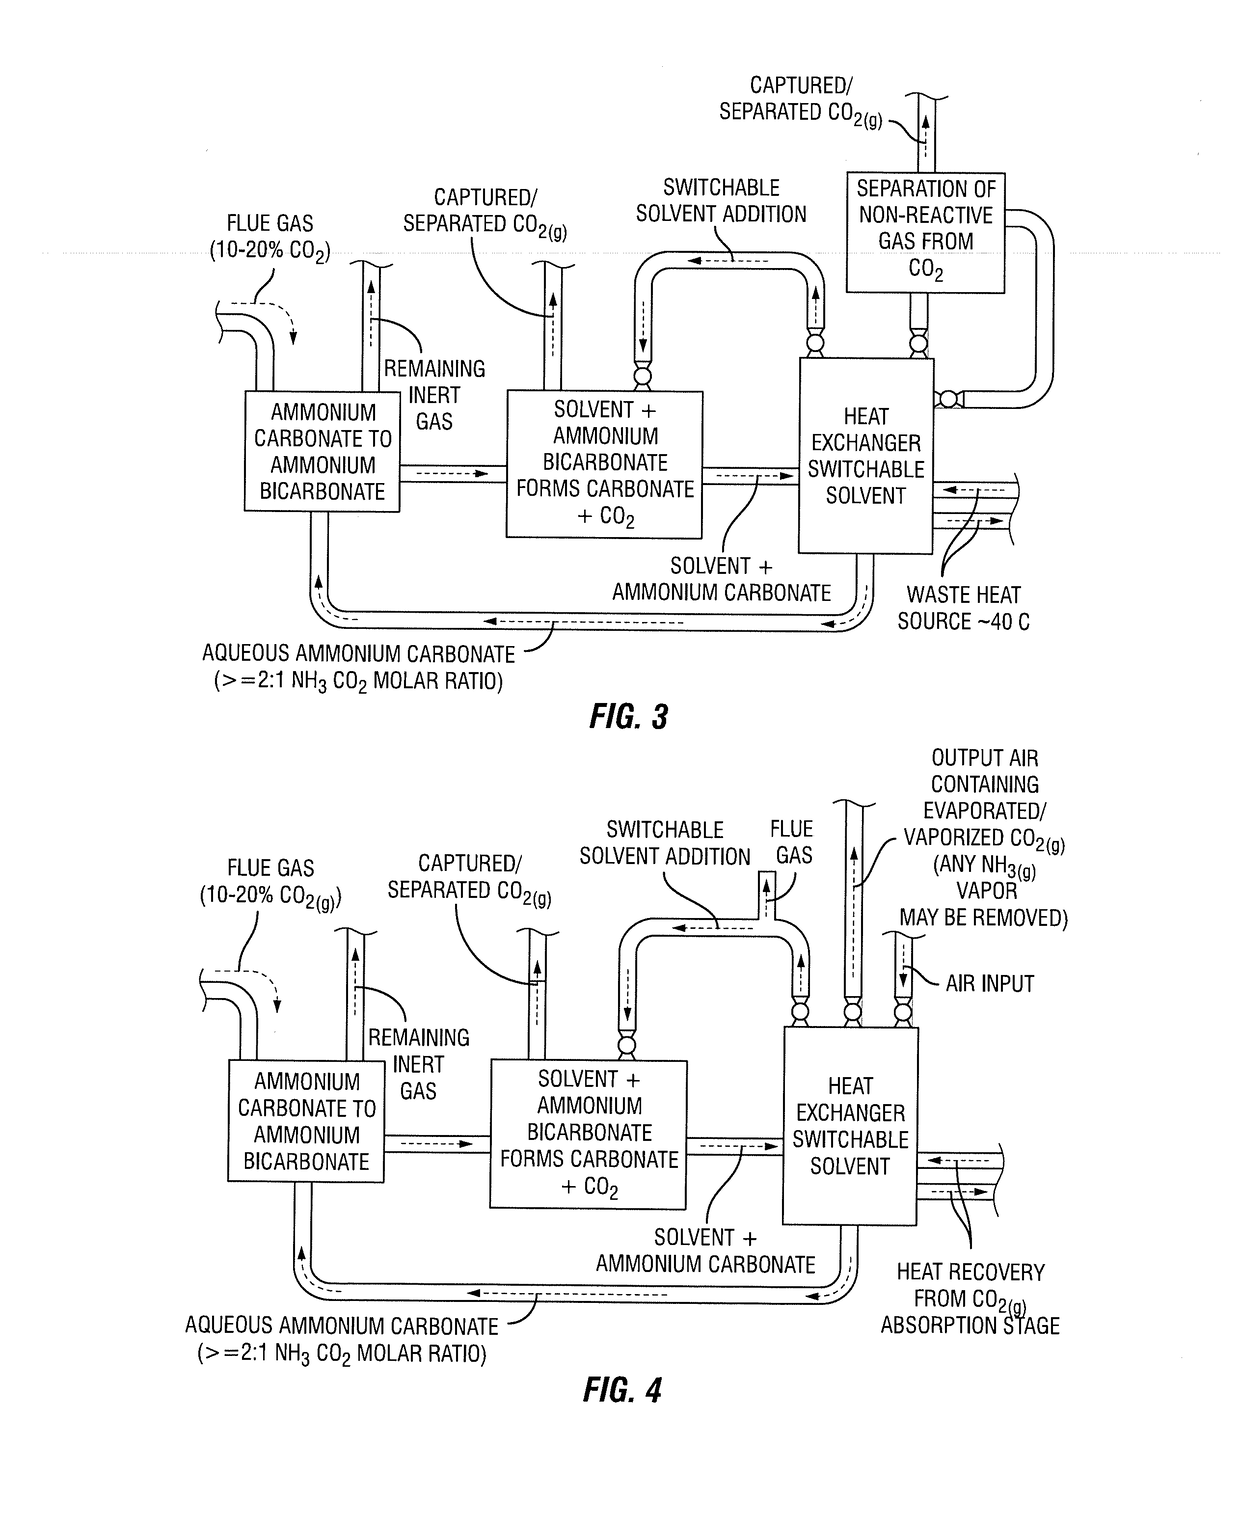 Integrated process for capturing carbon dioxide